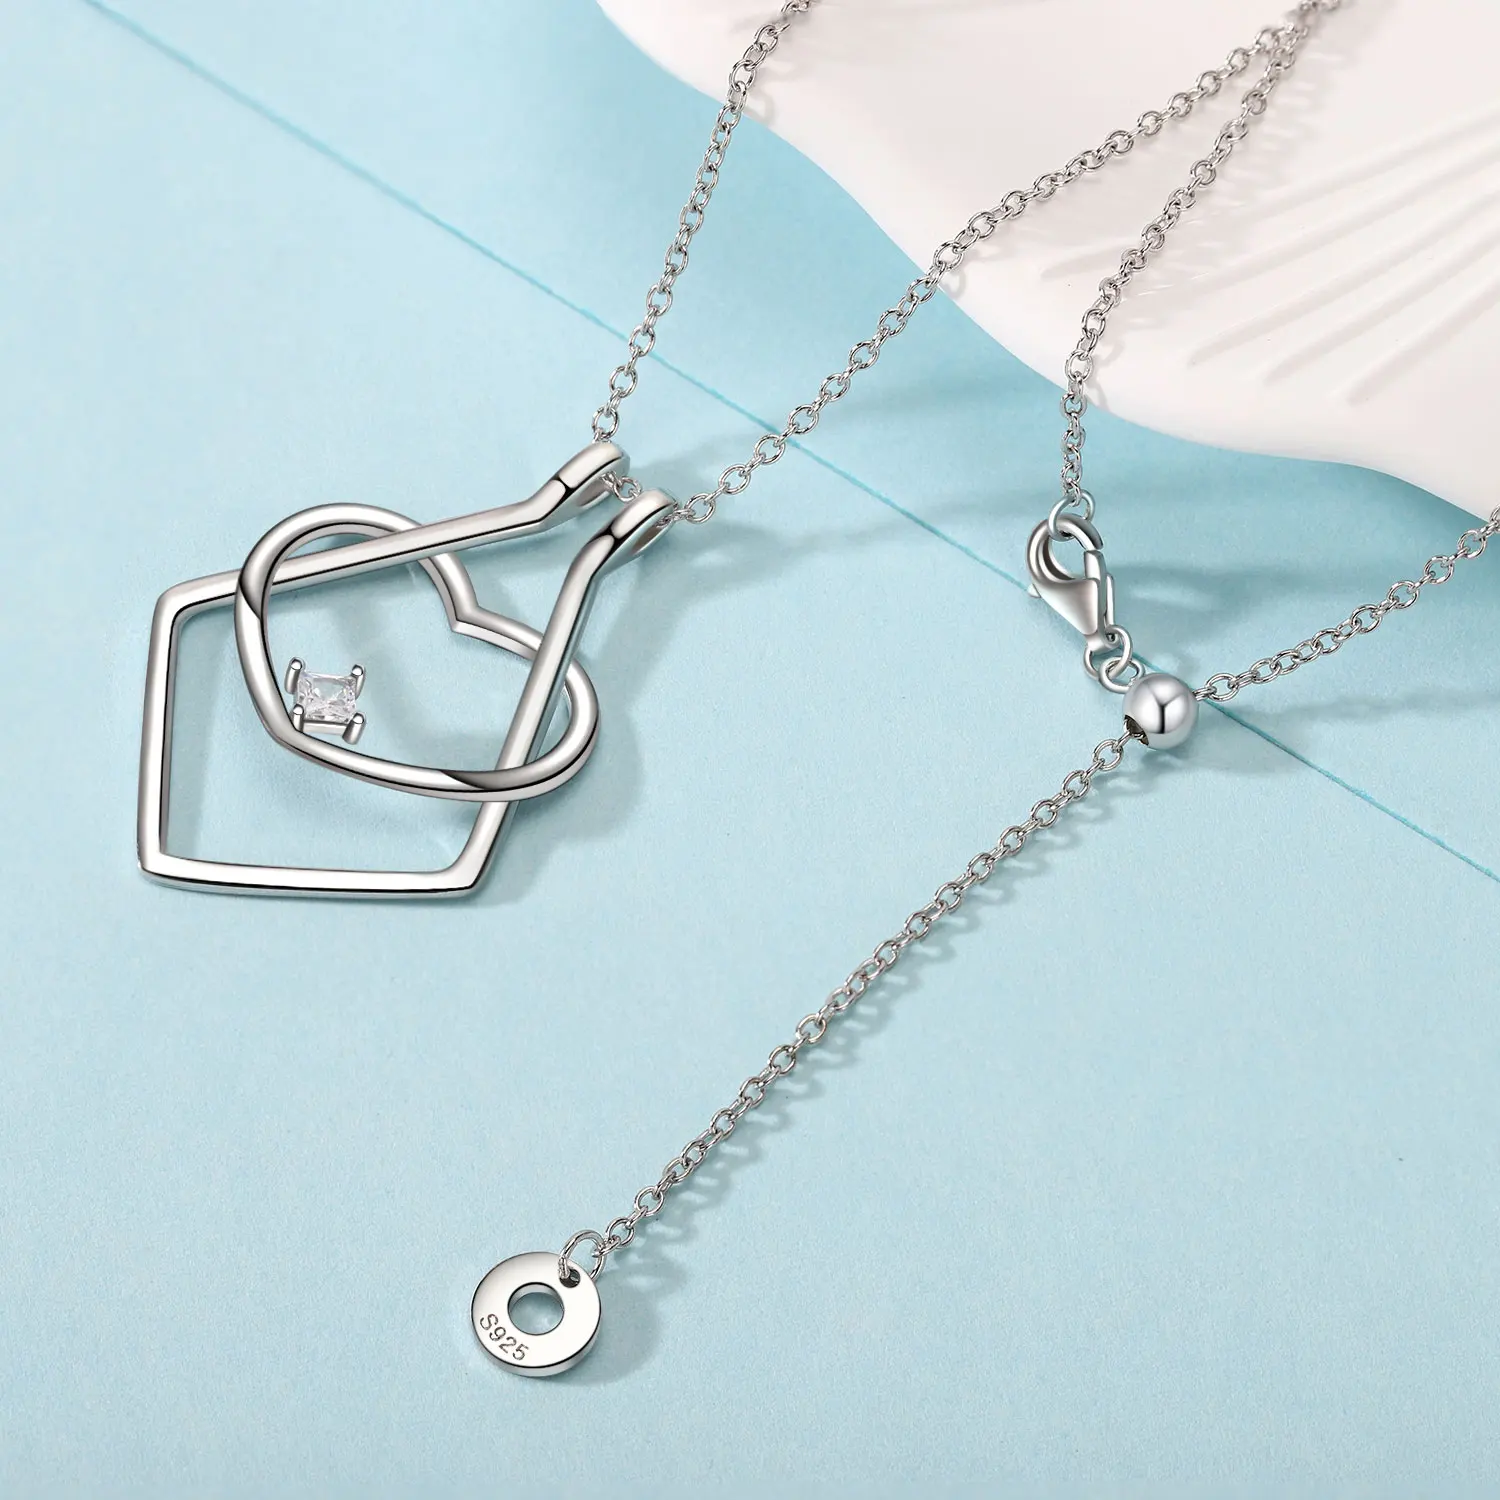 silver magic ring holder necklace ring keeper necklace